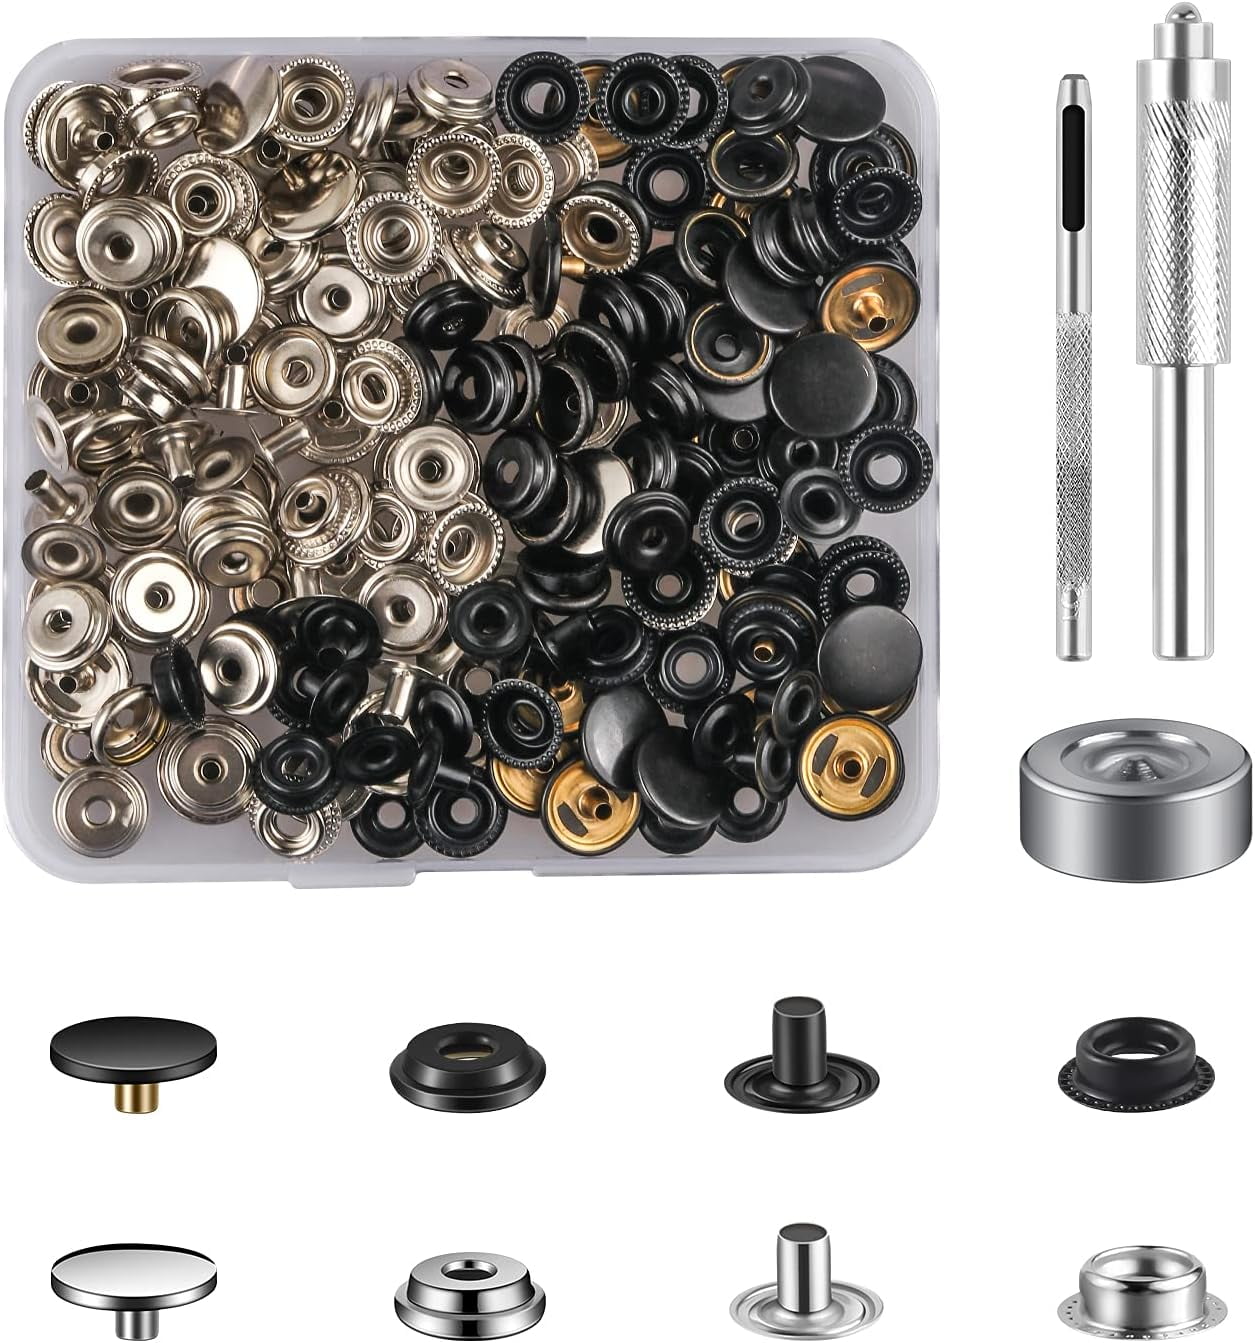  TEHAUX 2 Boxes Metal Snap Button Press Studs Hats Buttons Press  Stud Cap Metal Snap Fasteners Sew on Snap Buttons Snaps for Fabric Press  Tool Kit Clothes Buttons Invisible Press Nail